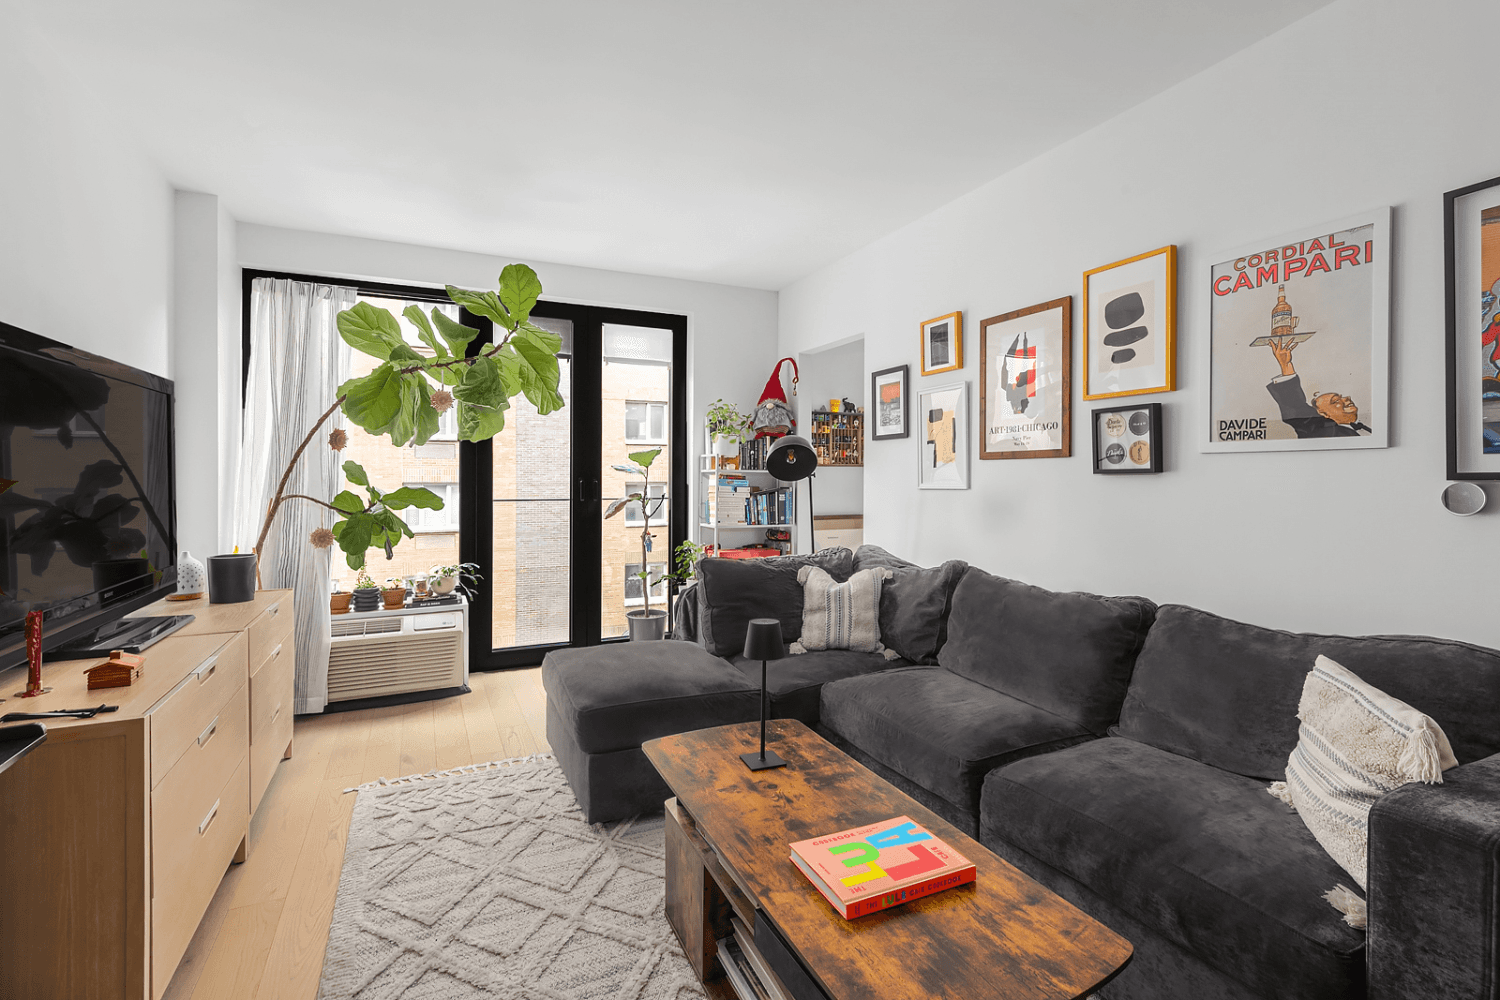 Welcome to home to this contemporary 1 Bedroom, 1 Bathroom at East Harlem's newest residential gem, HUXLEY.